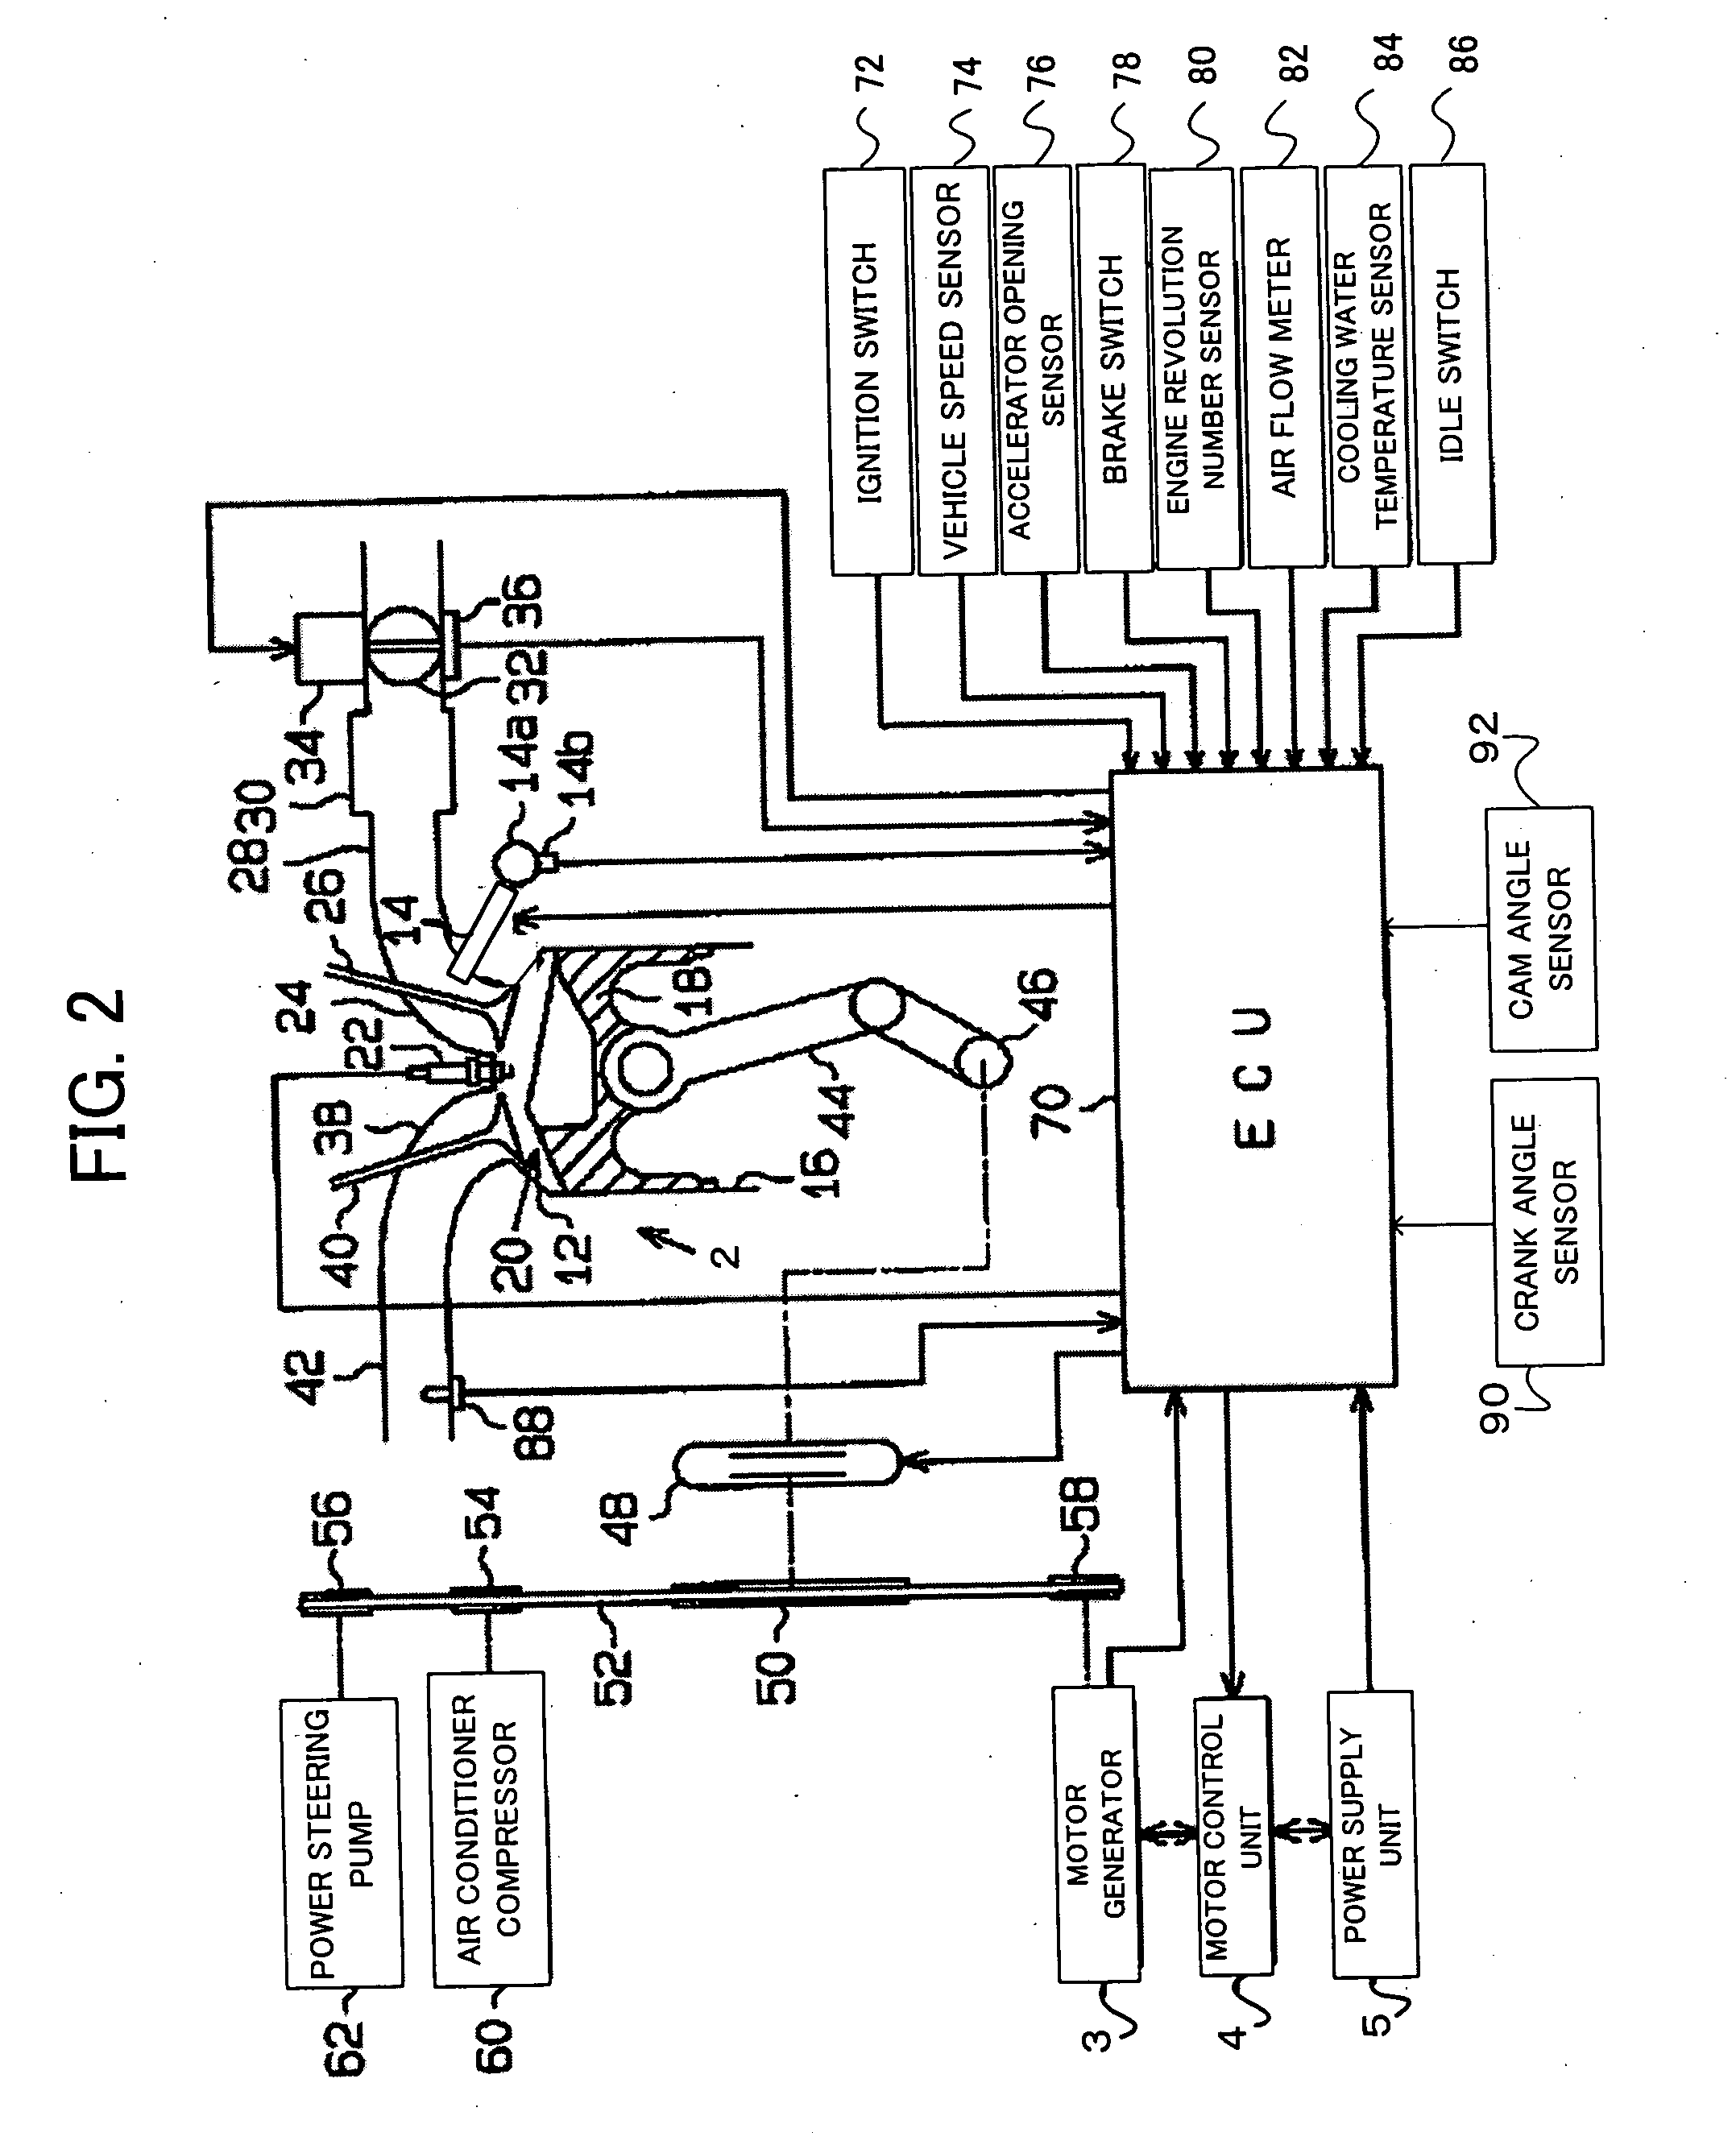 Stop and start control apparatus of internal combustion engine